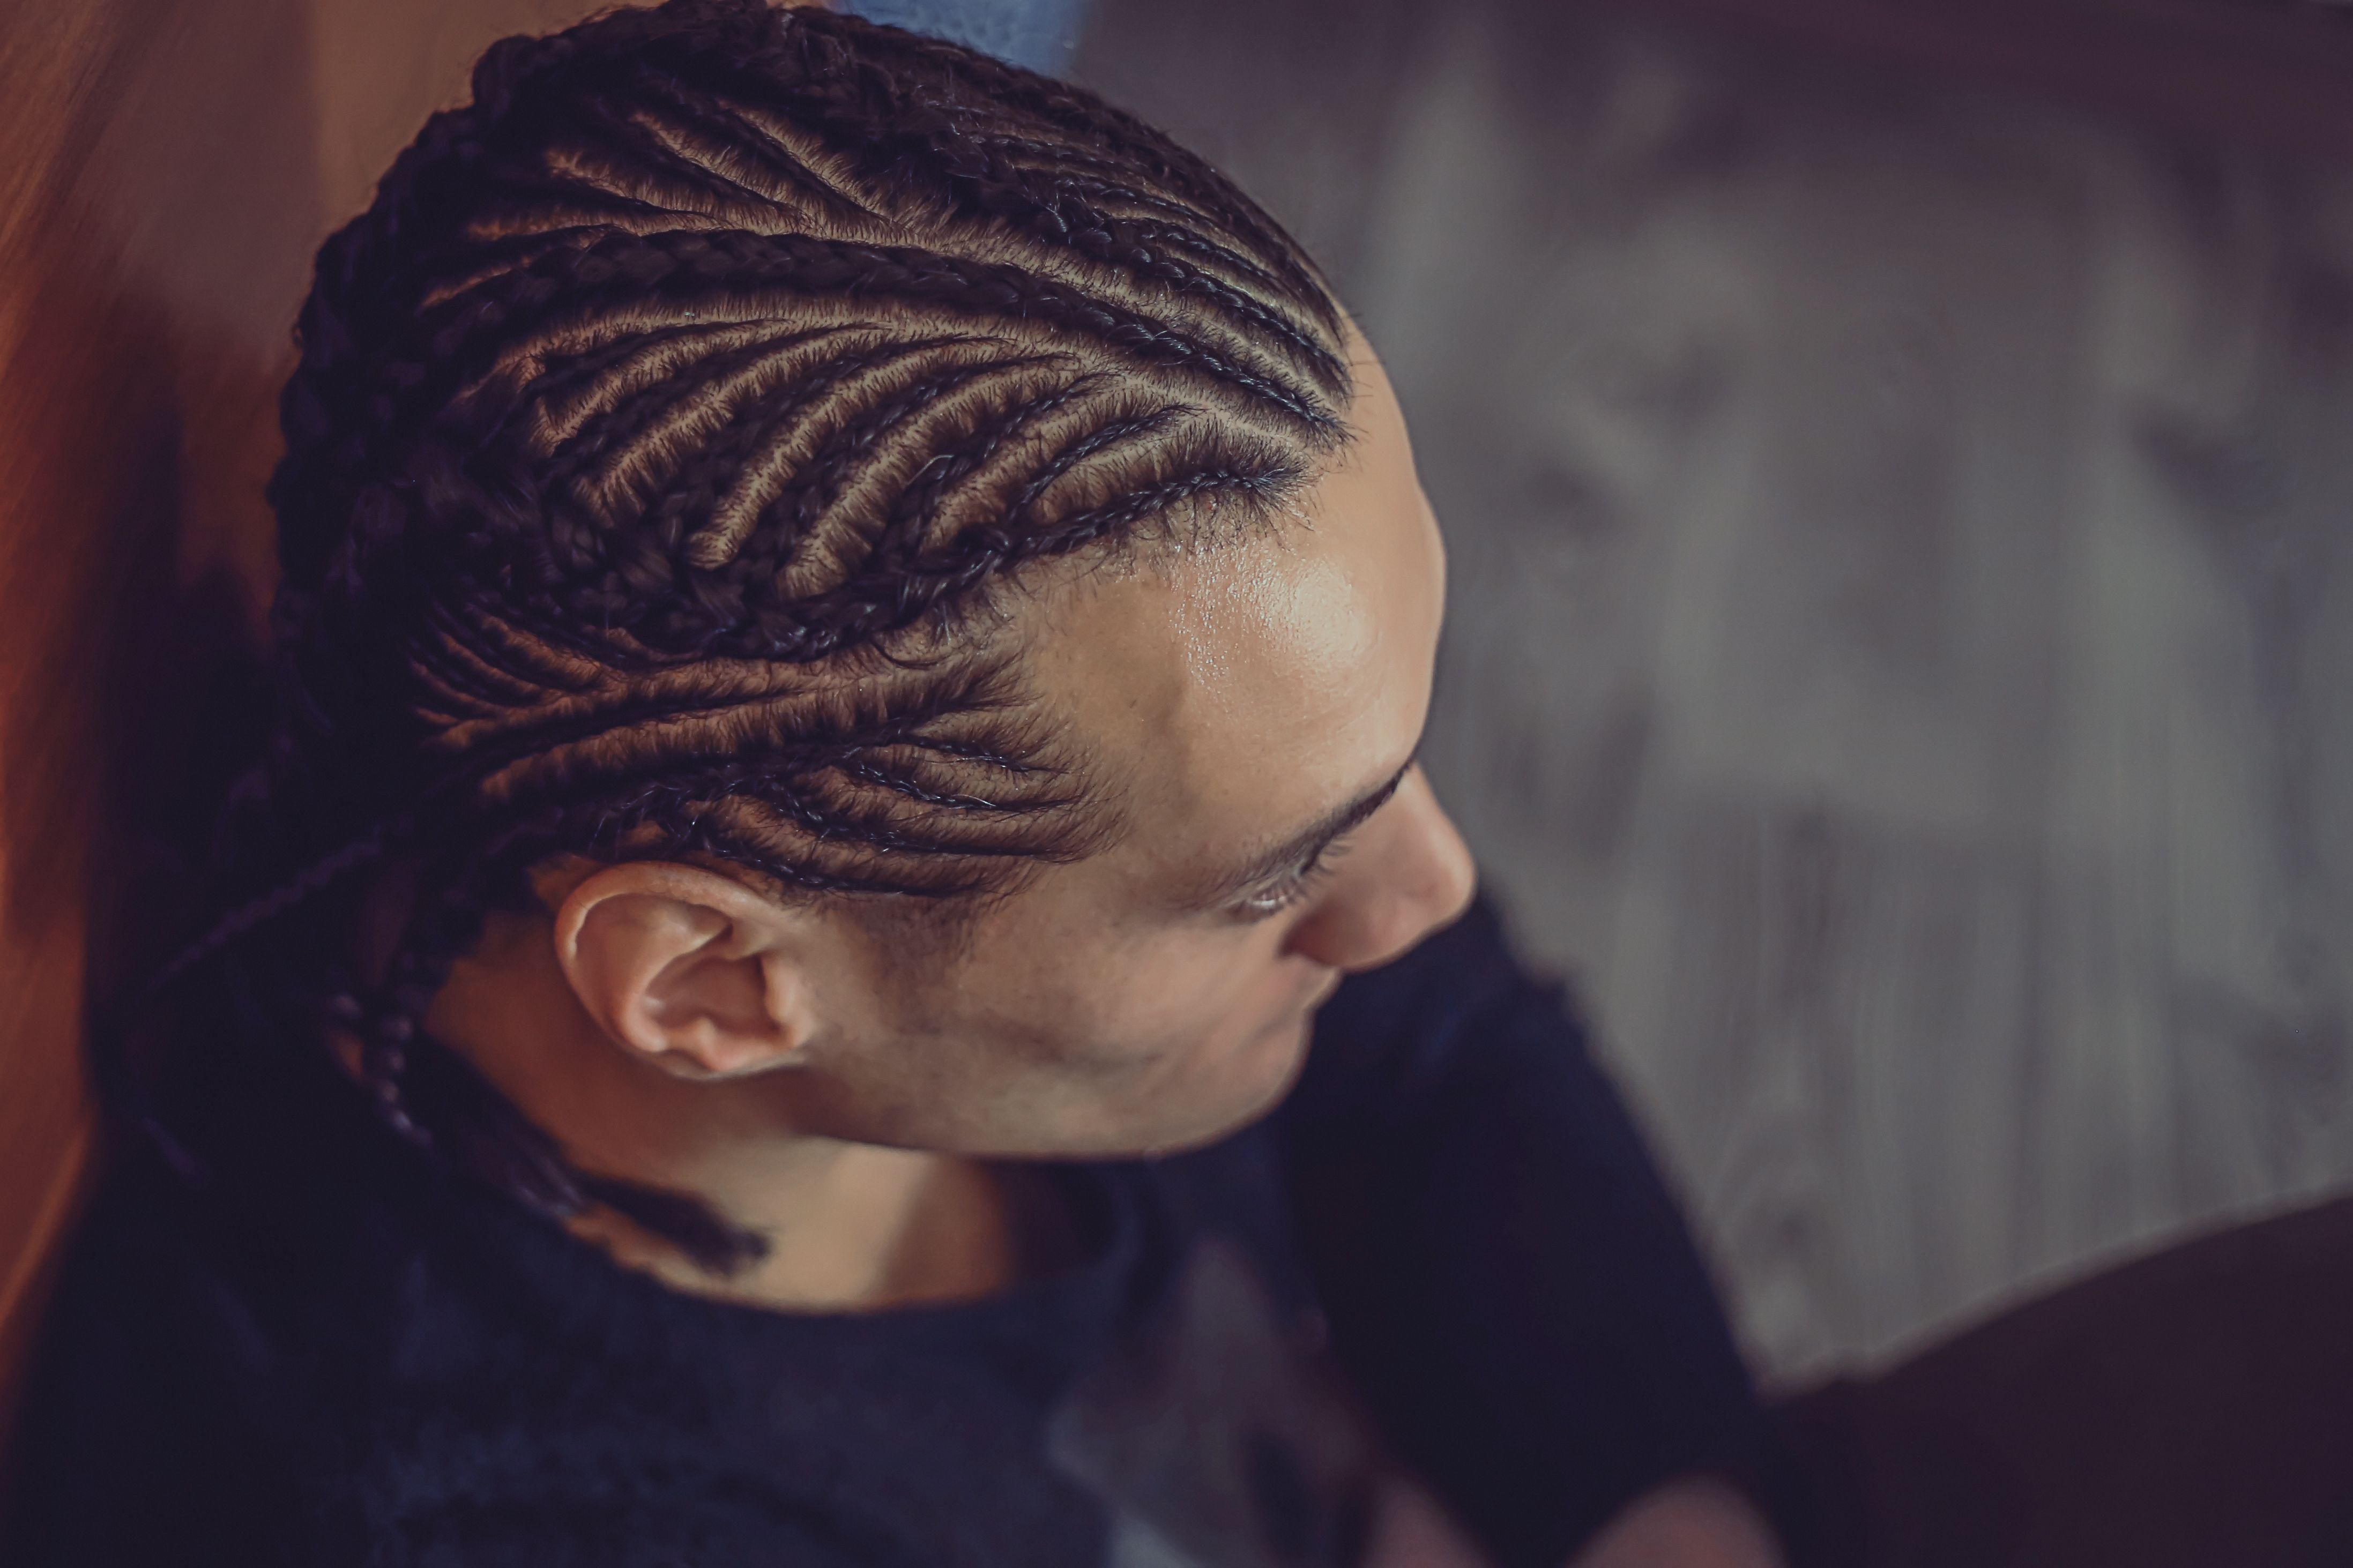 59 Popular Braids Hairstyles For Men To Copy in 2023  Mens braids  hairstyles Two braid hairstyles Braids with fade